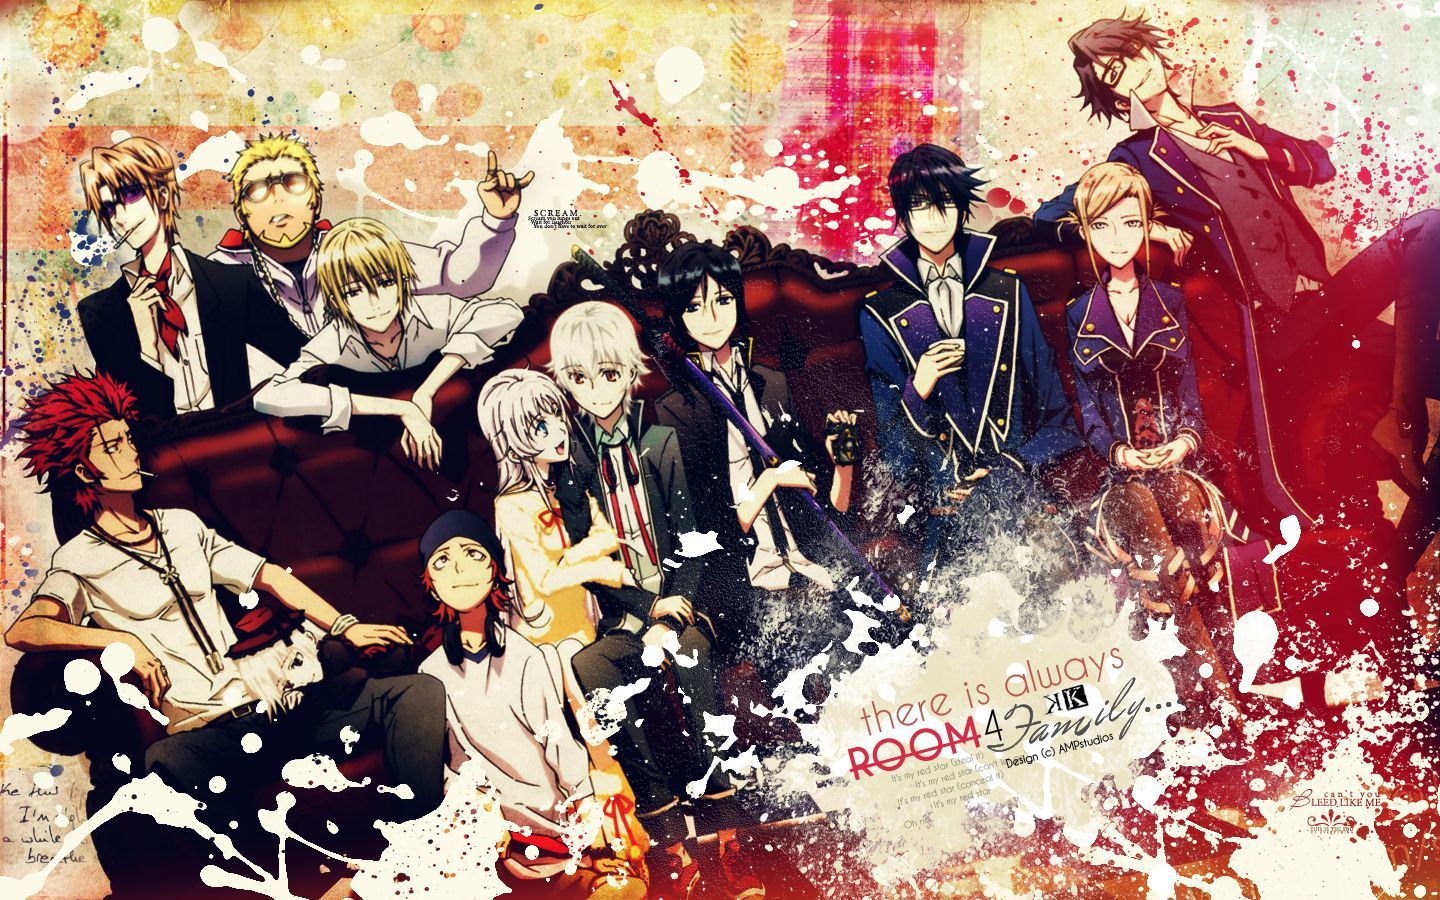 Under Armour Wallpaper HD Resolution. K project, Under armour wallpaper, K project anime